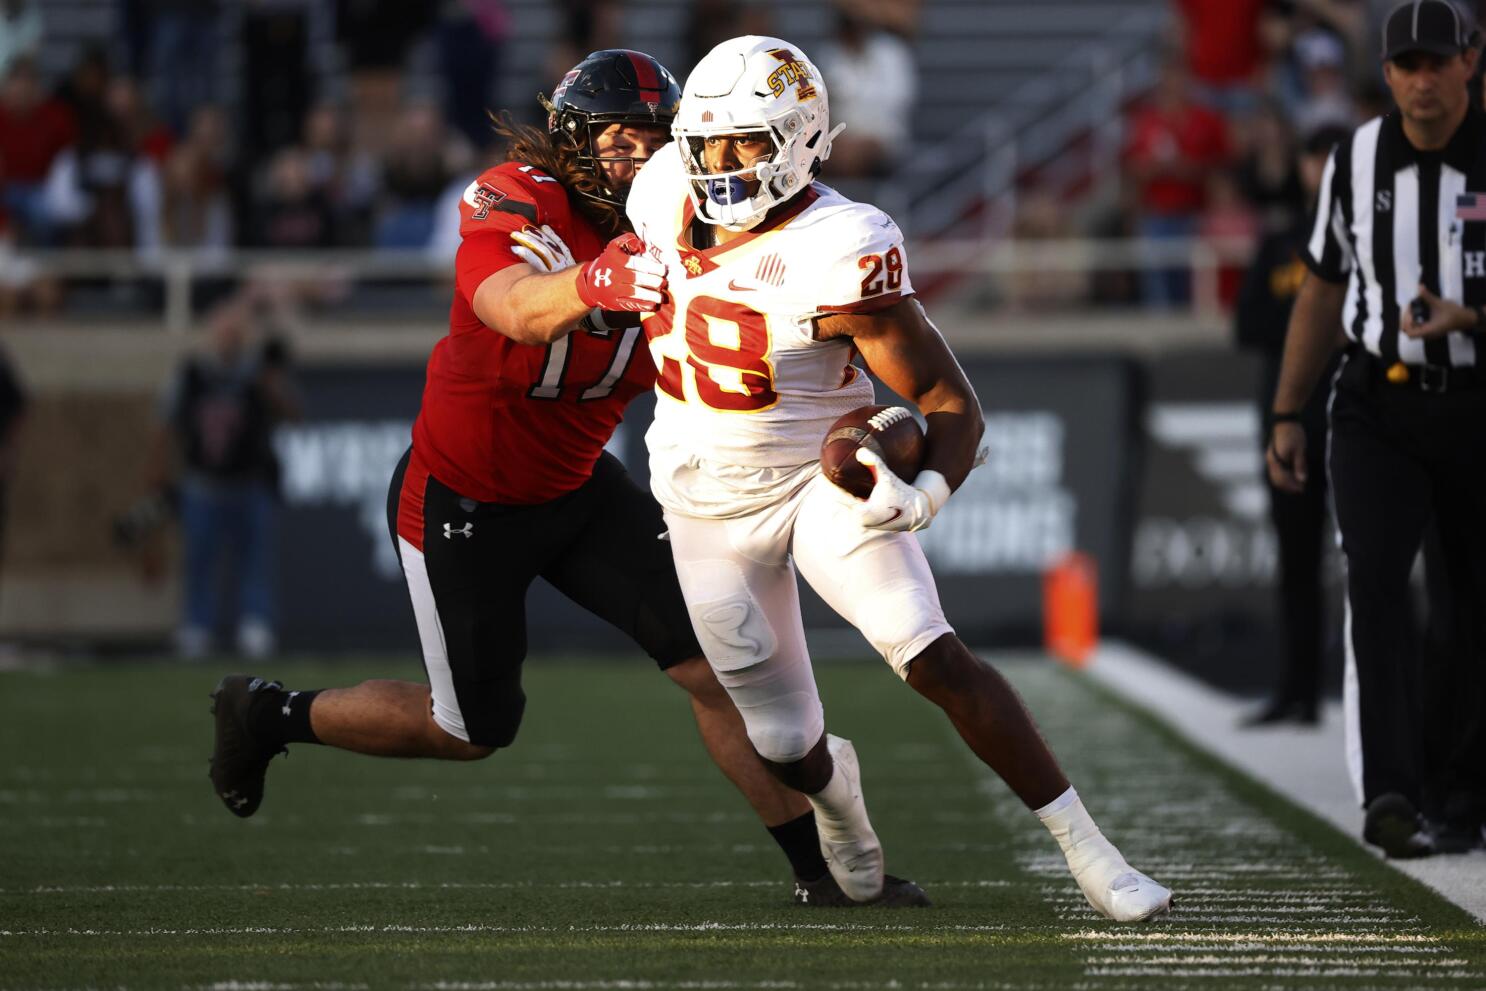 2022 NFL Draft Scouting Report: RB Breece Hall, Iowa State